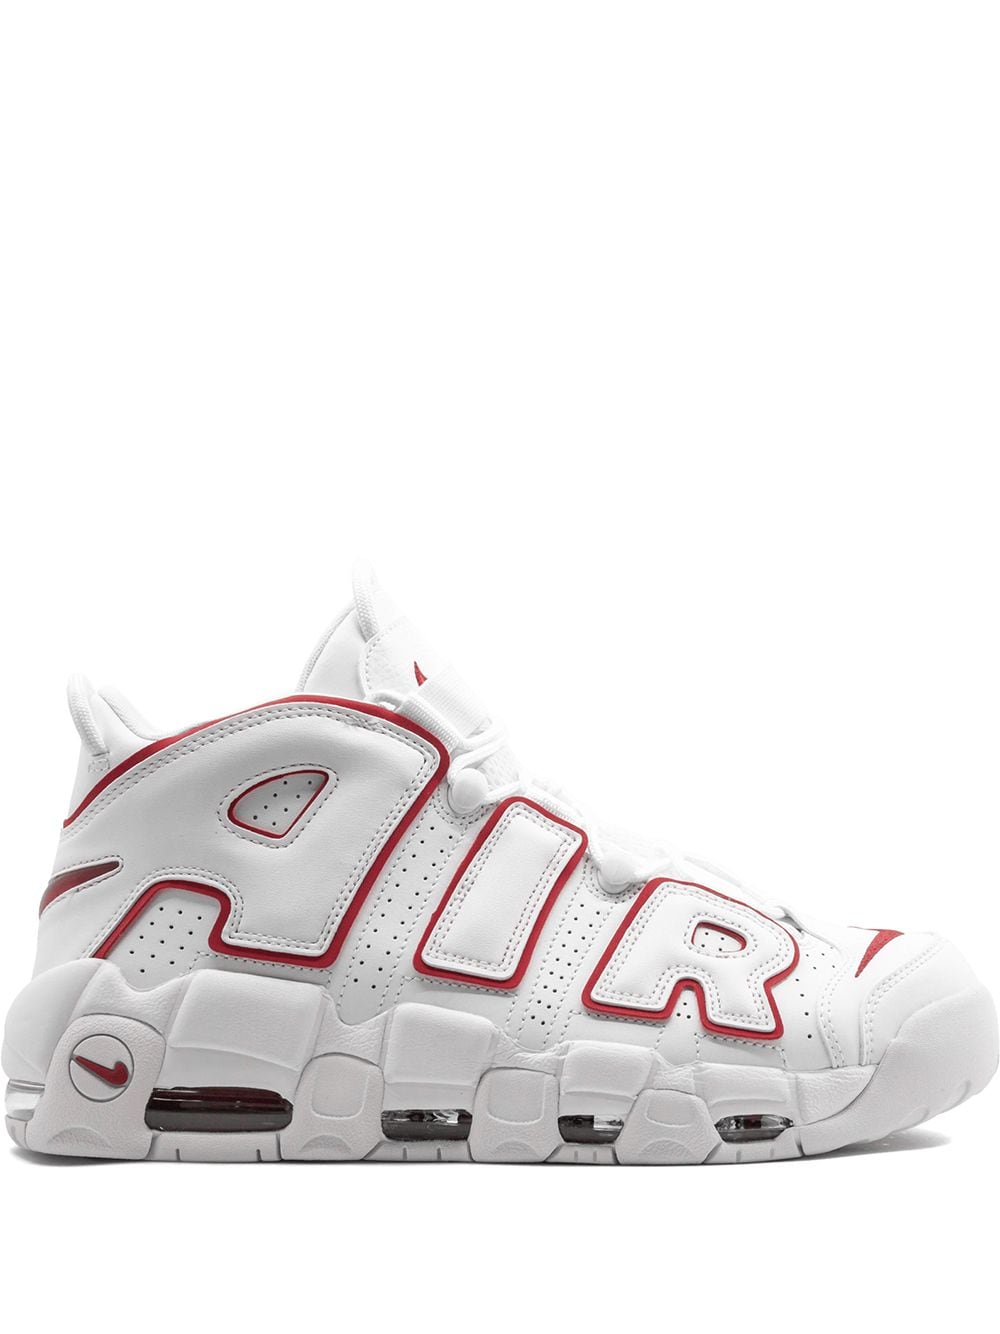 Nike Air More Uptempo '96 "White/Varsity Red/White" Sneakers - Farfetch